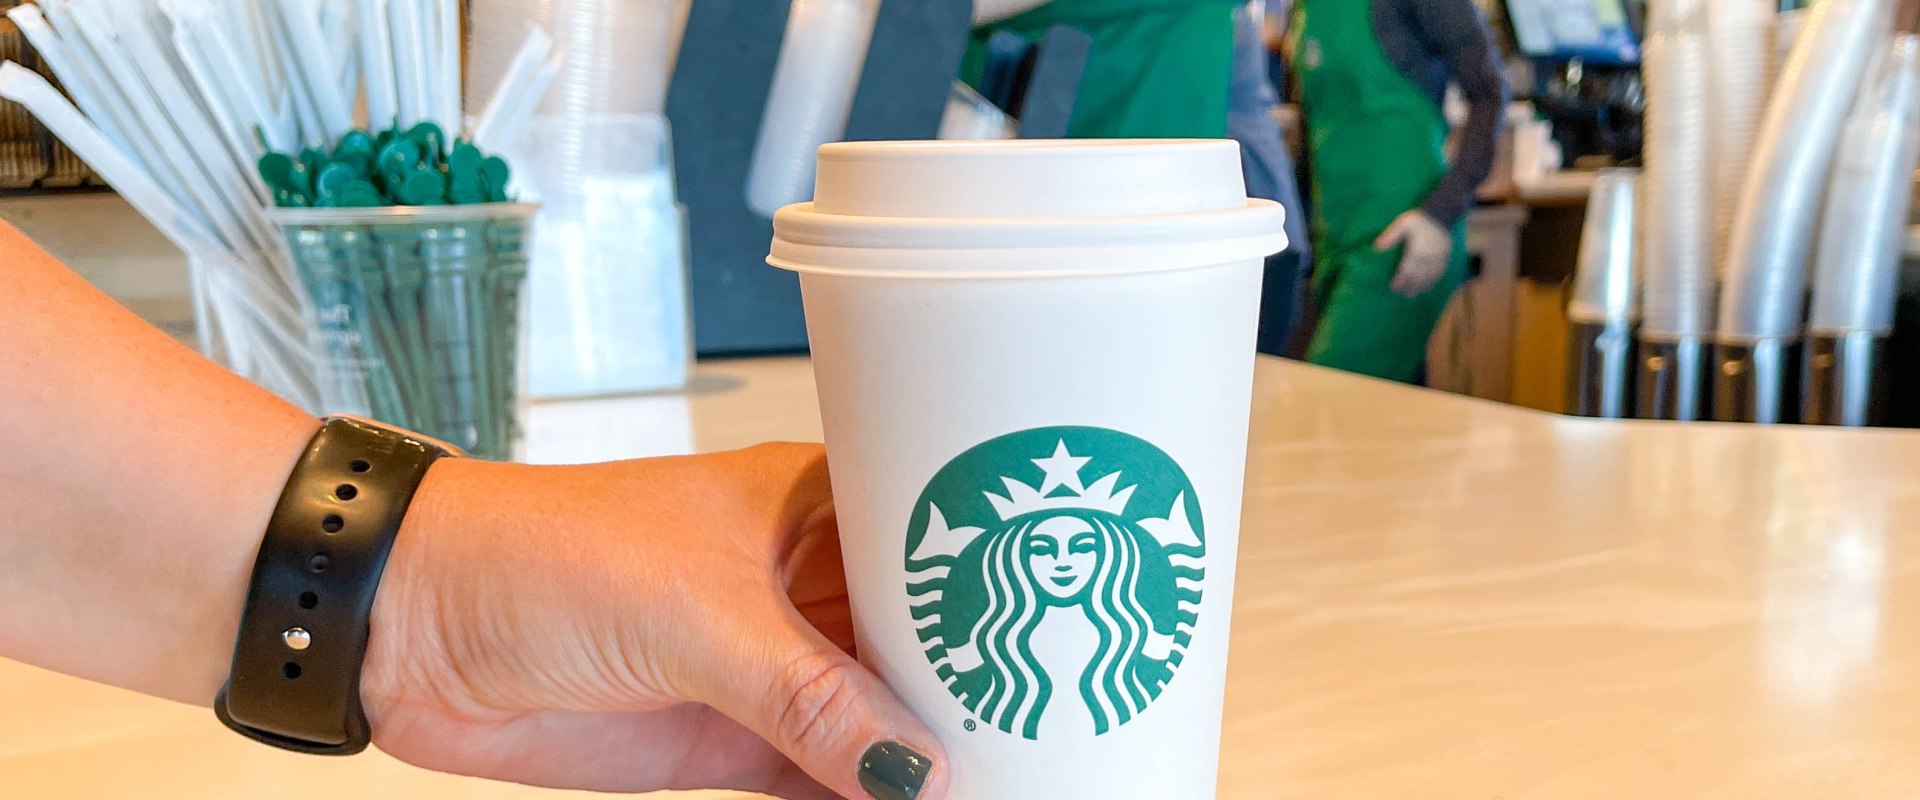 How Much Does a Starbucks Latte Cost?